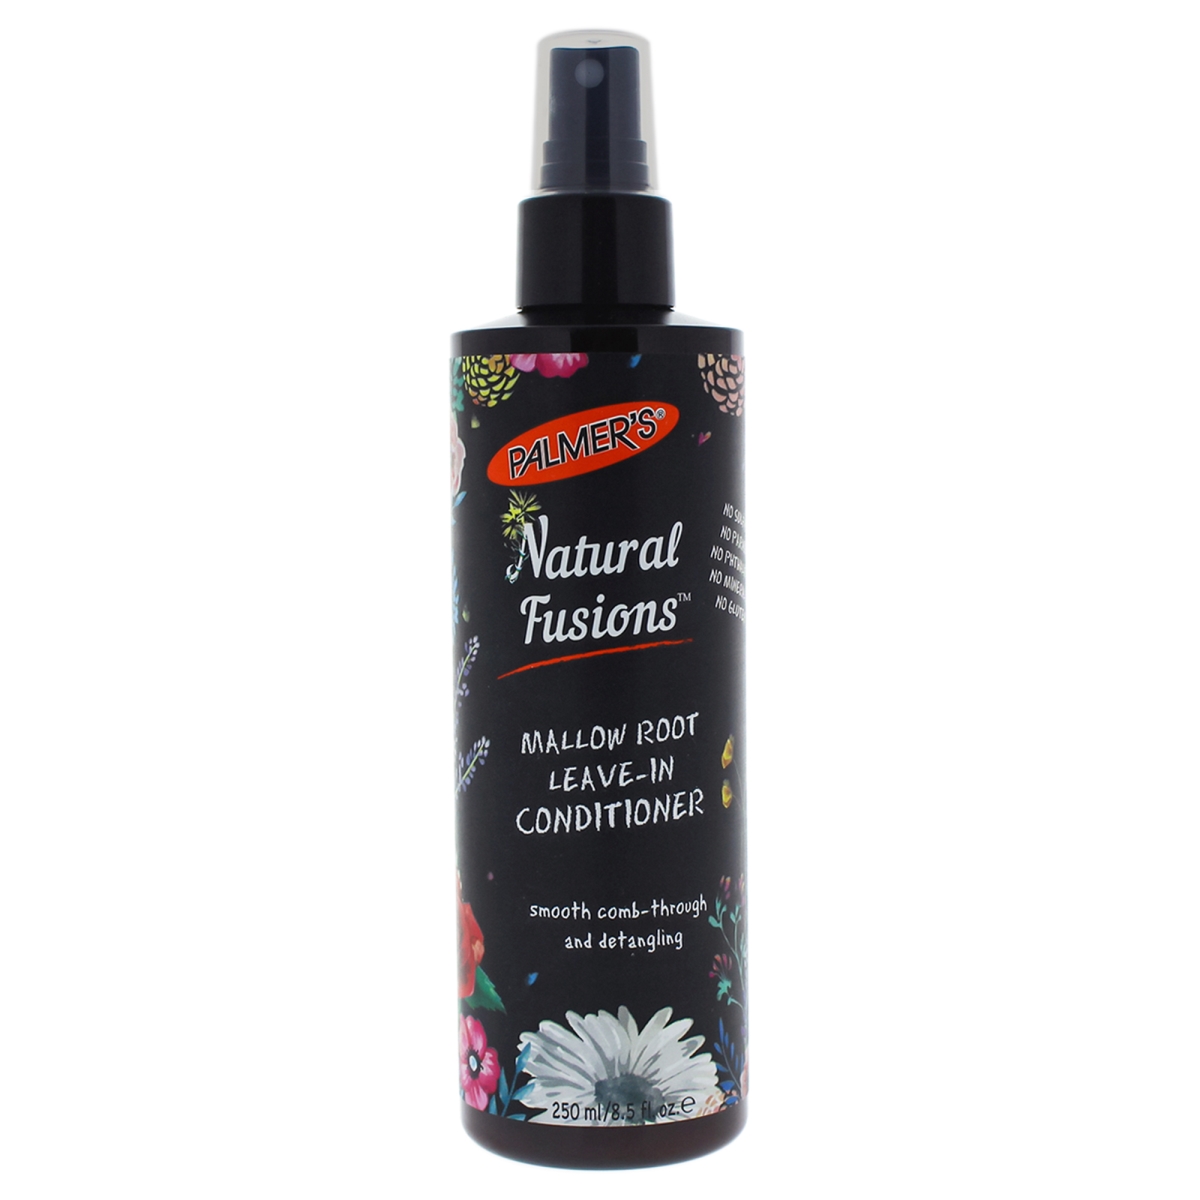 I0088442 Natural Fusions Leave-in Conditioner Mallow Root Conditioner For Unisex - 8.5 Oz